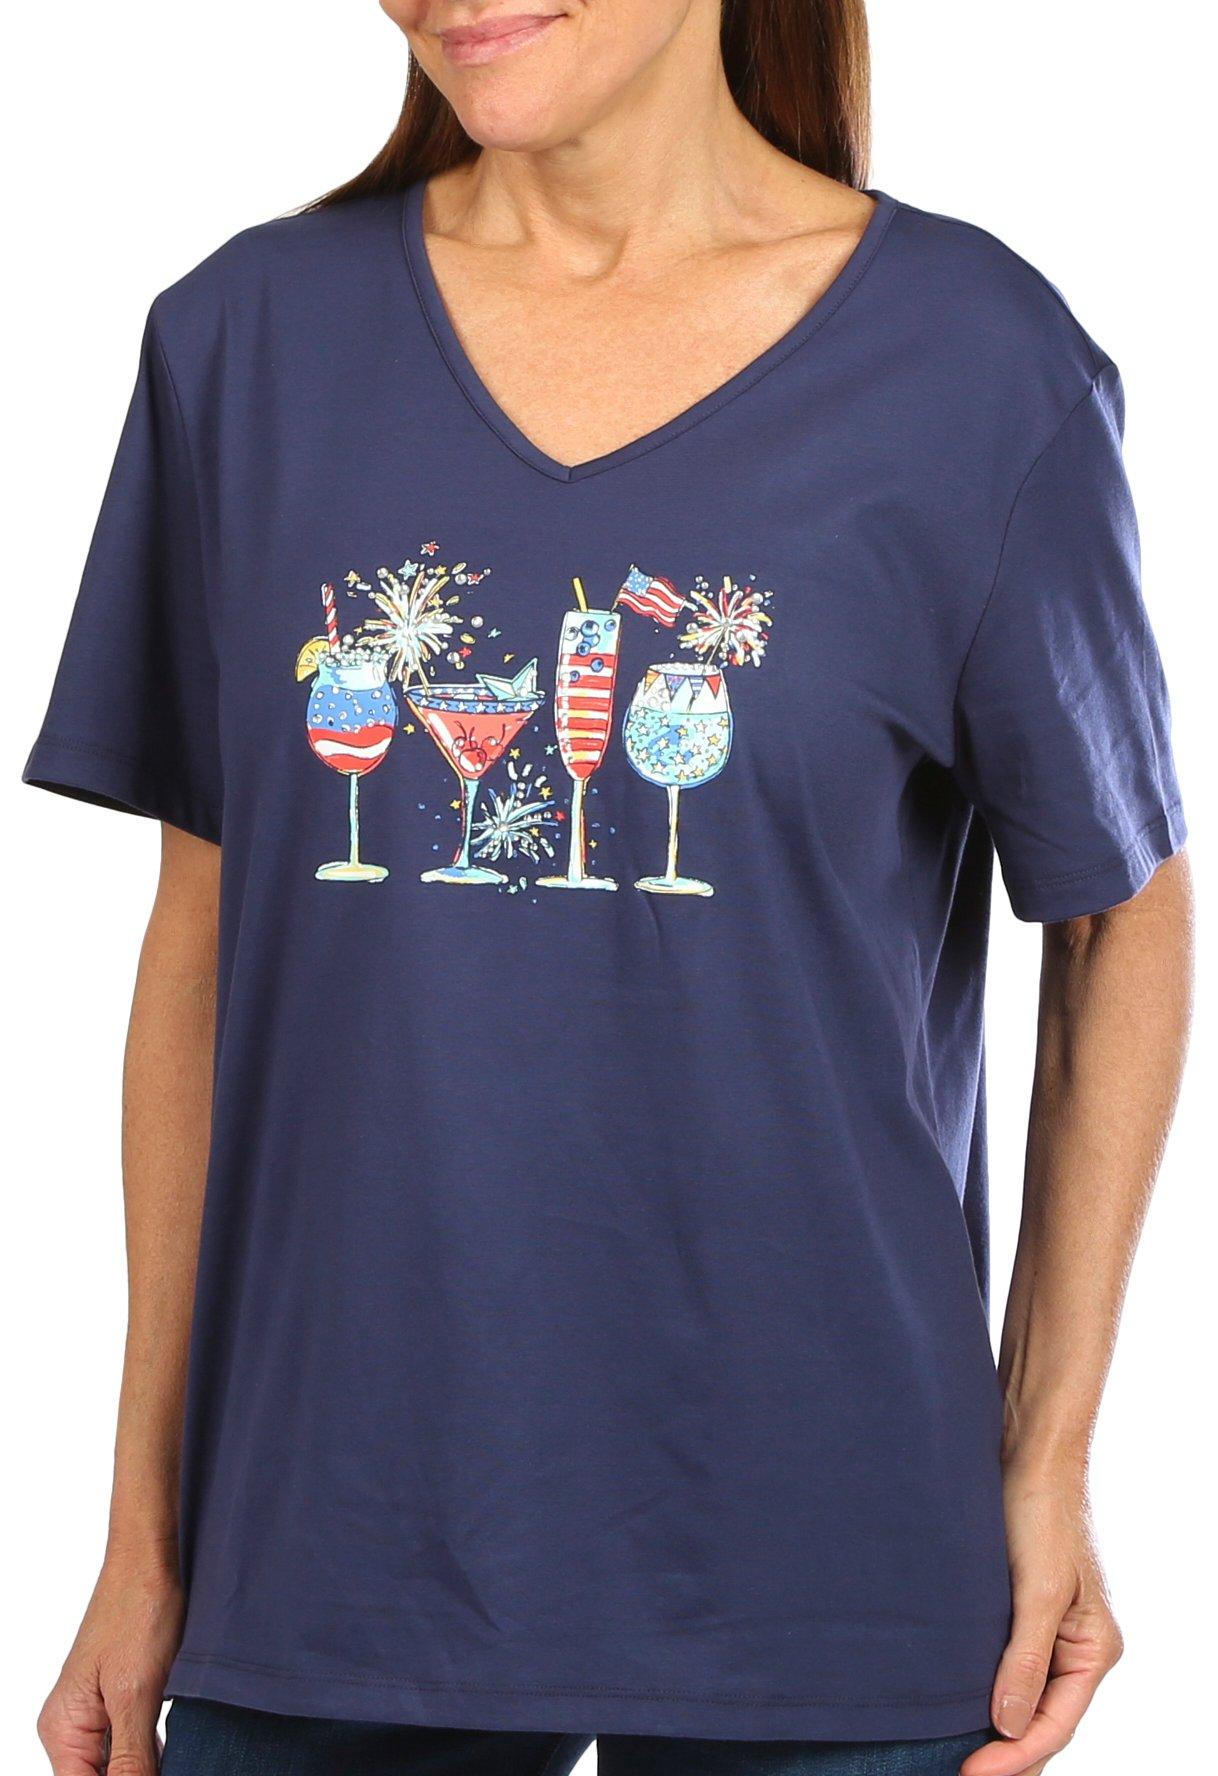 Coral Bay Womens Americana Cocktails Jewel Short Sleeve Top